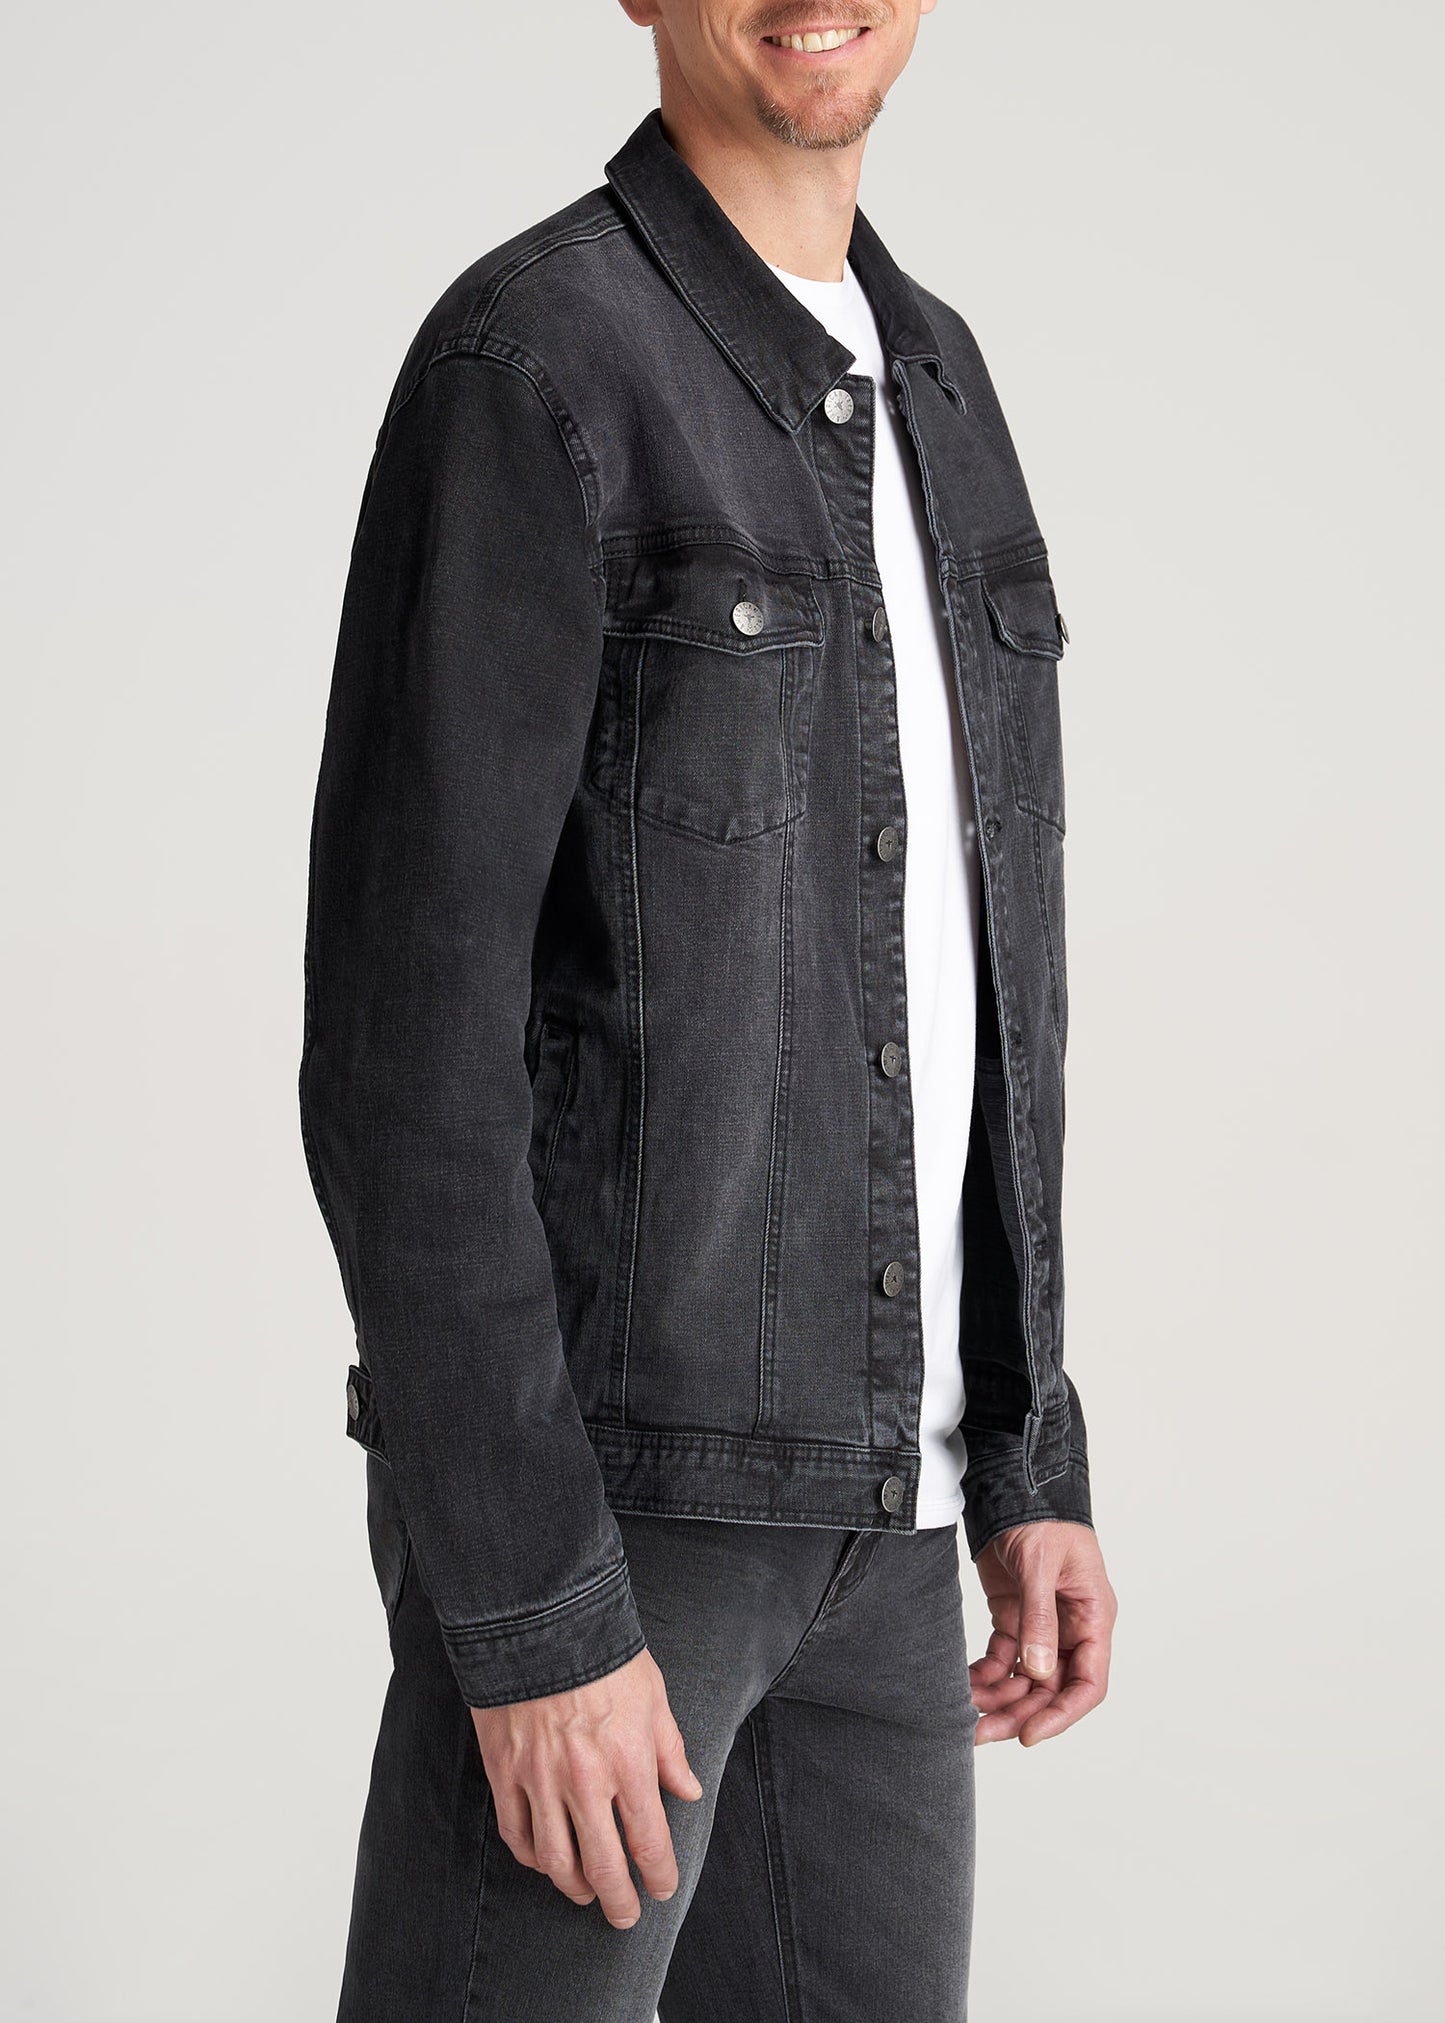 Men's Tall Denim Trucker Jacket in Washed Black M / Extra Tall / Washed Black